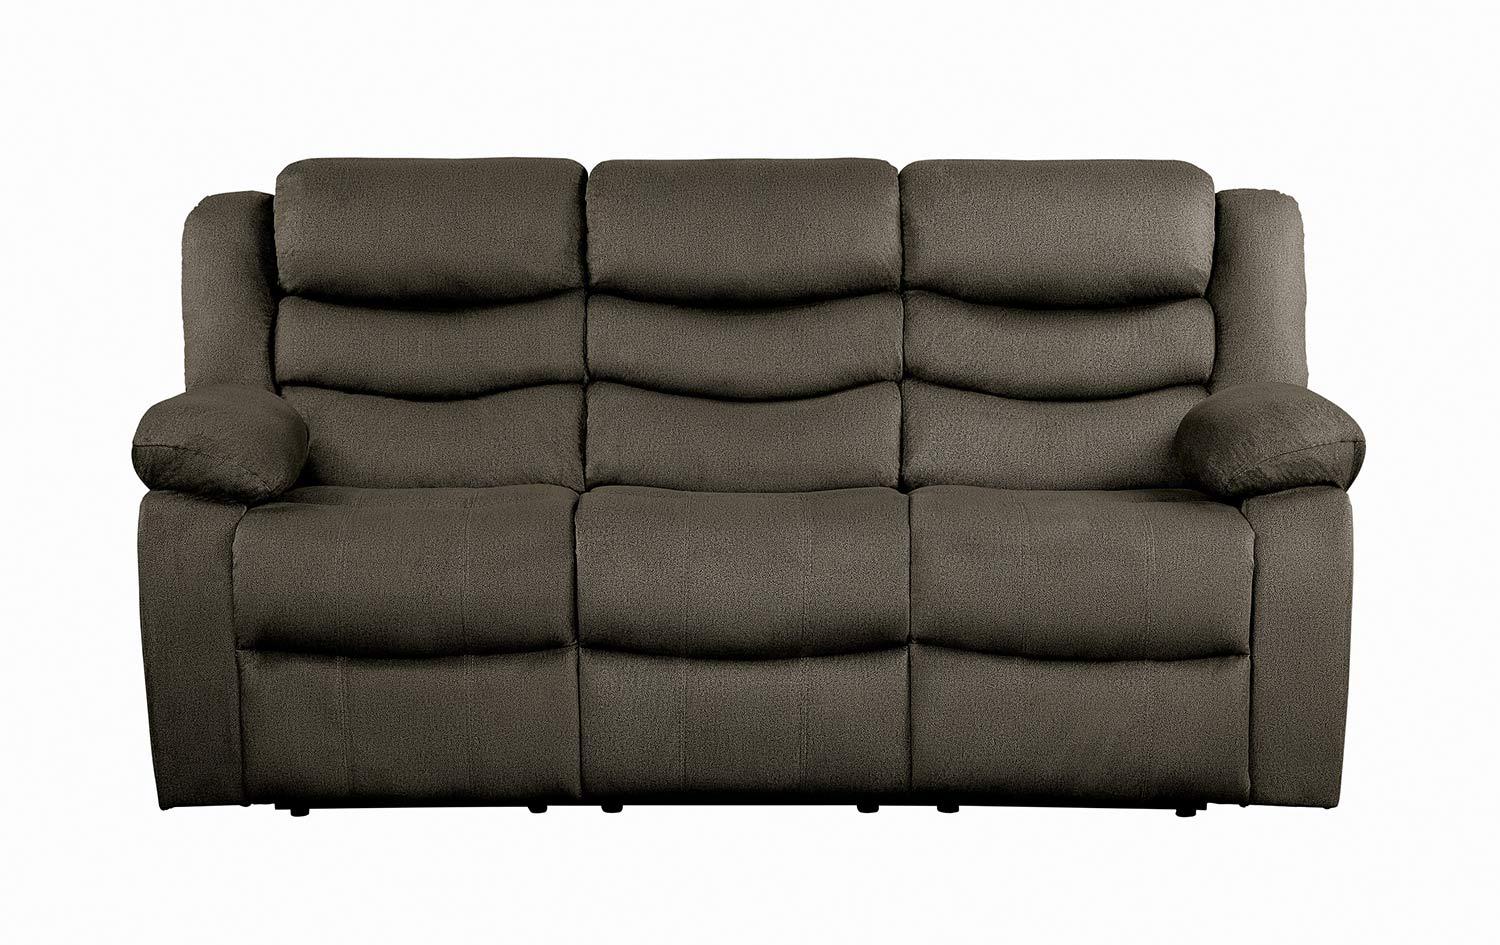 Homelegance Discus Double Reclining Sofa - Brown